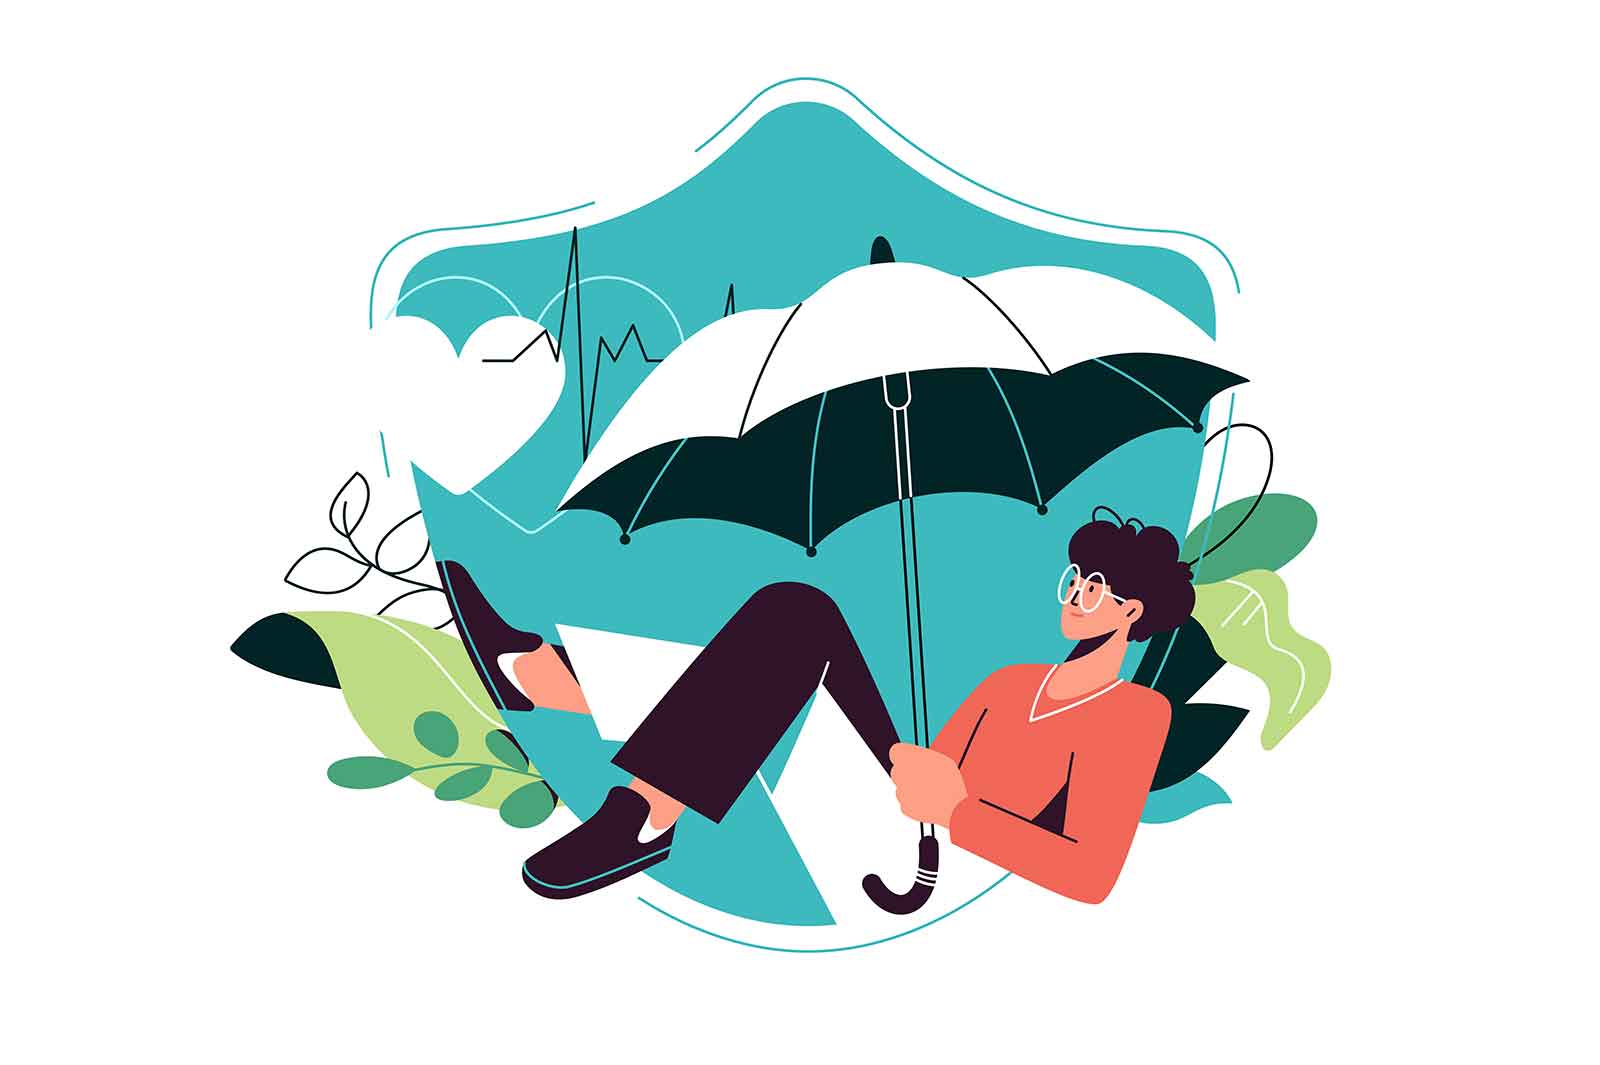 Shield protection with character holding umbrella, insurance concept vector illustration.